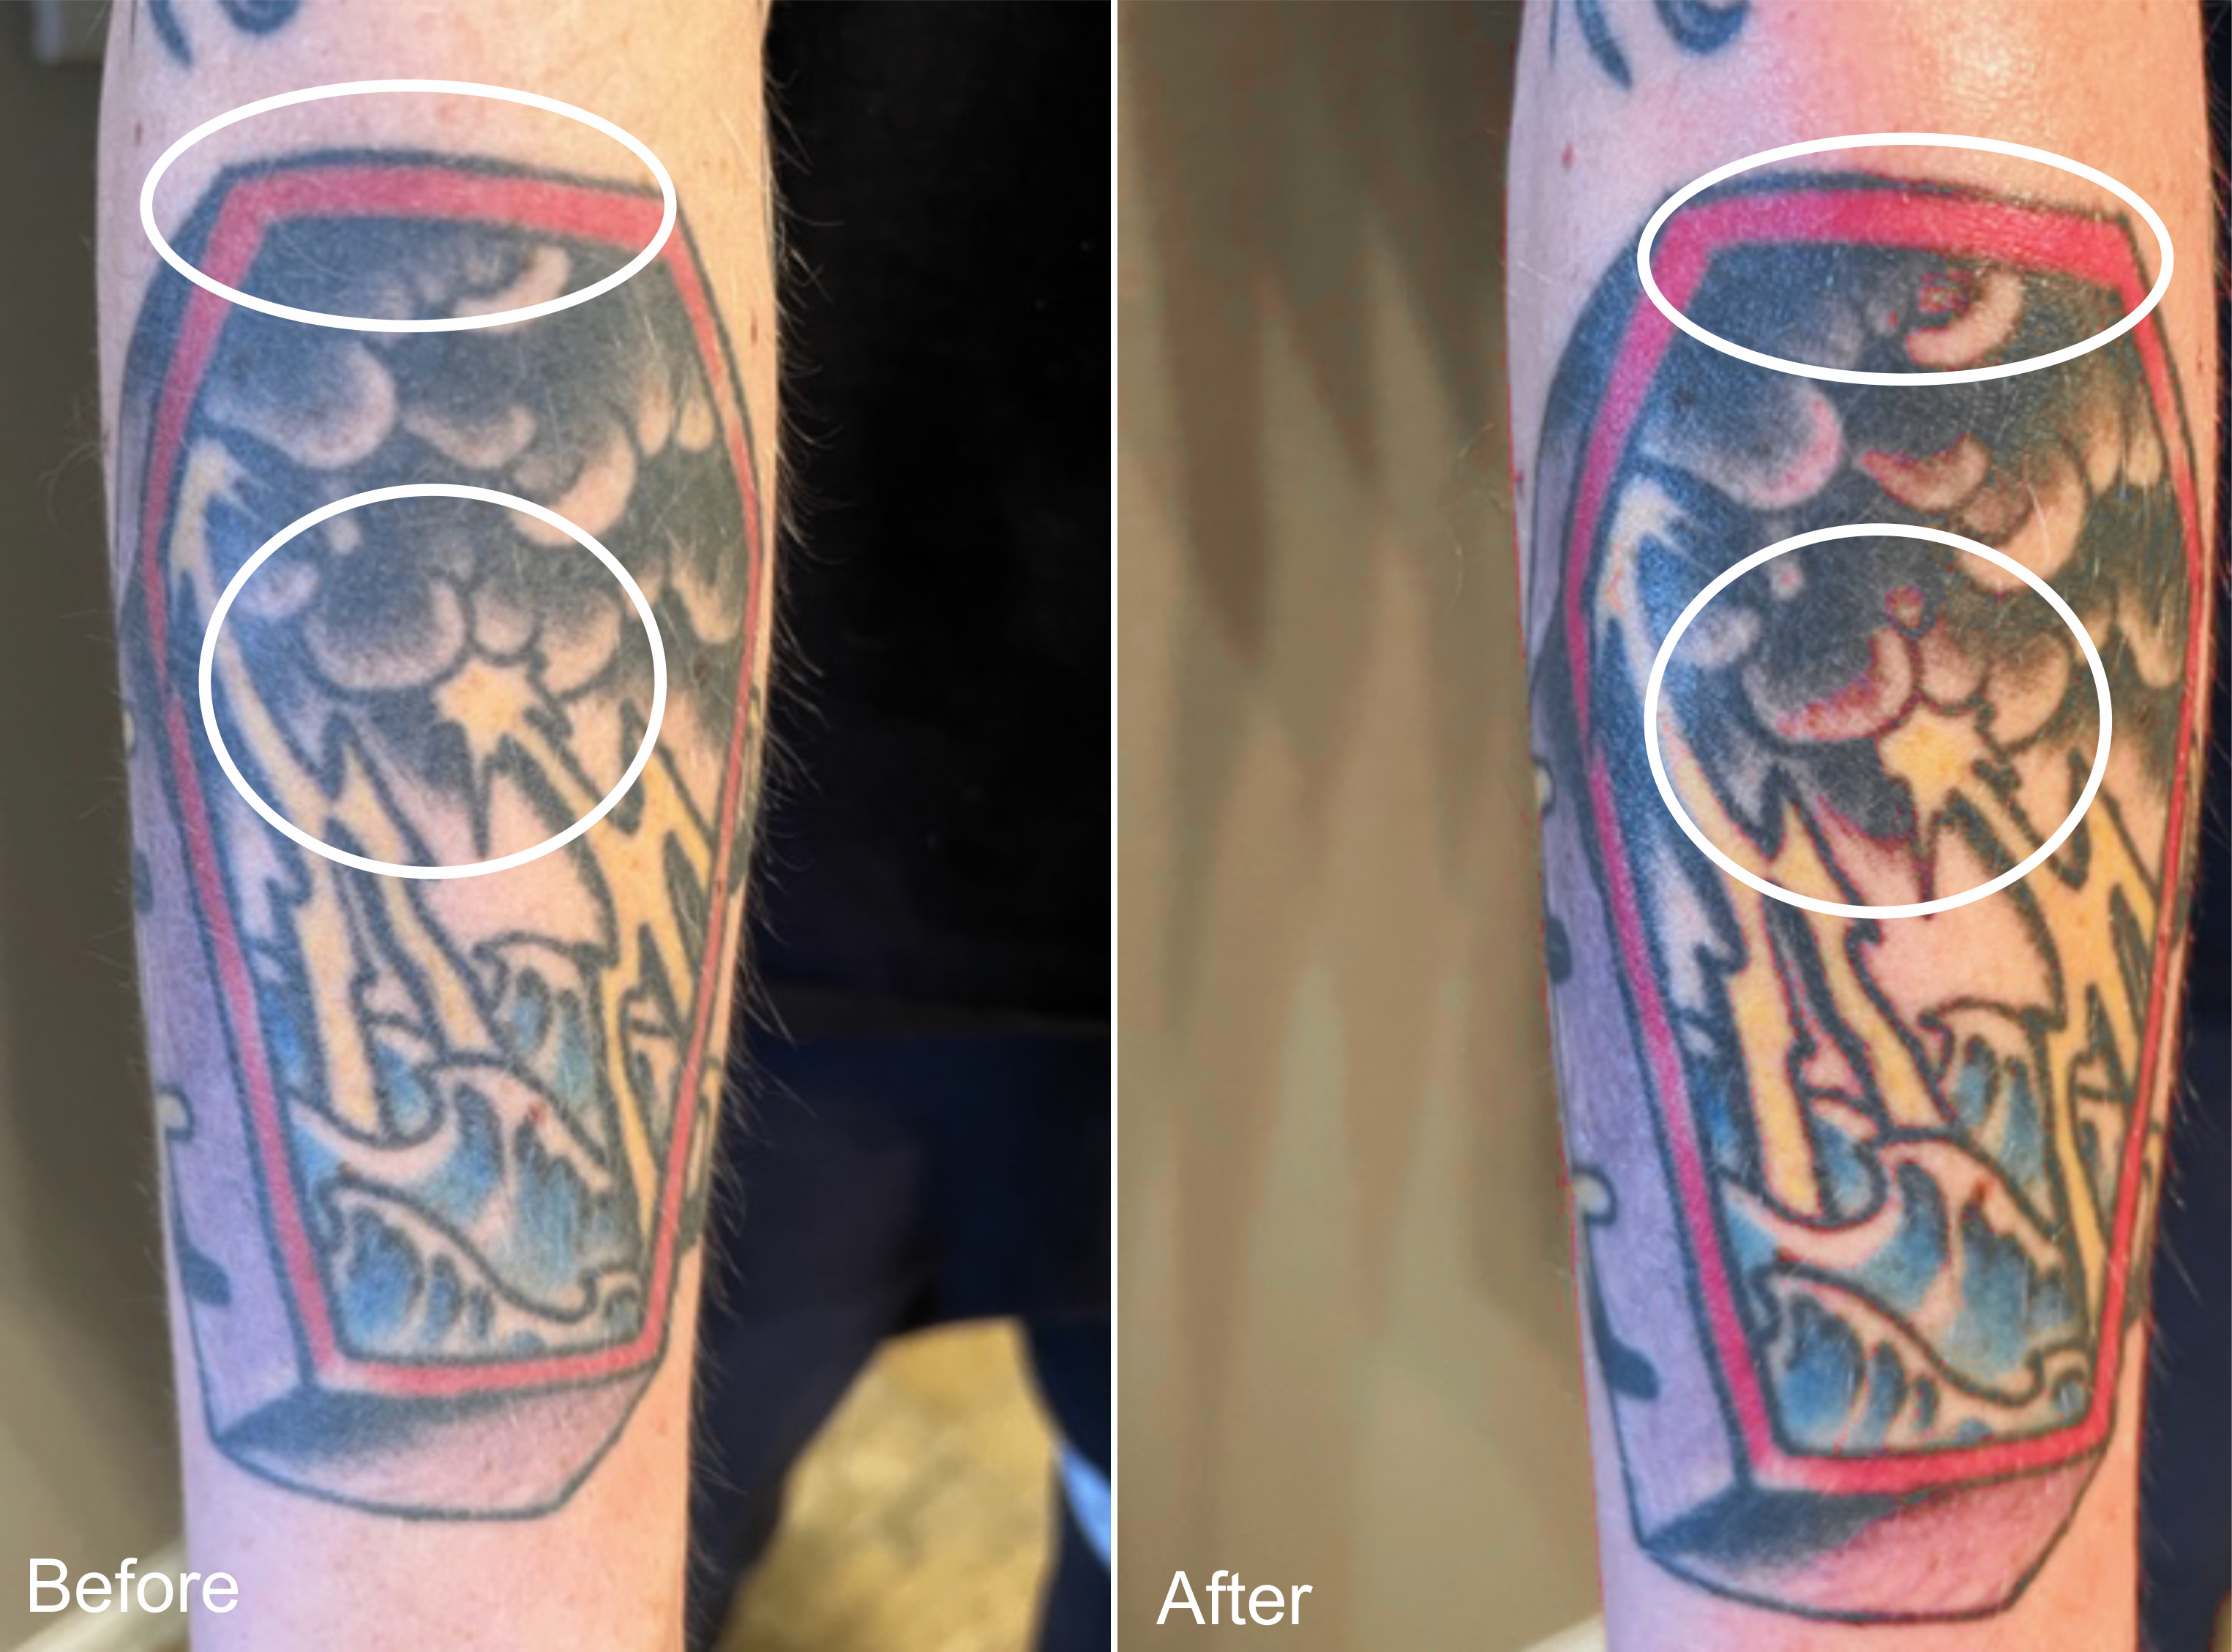 Coffin Tattoo Before and After Image